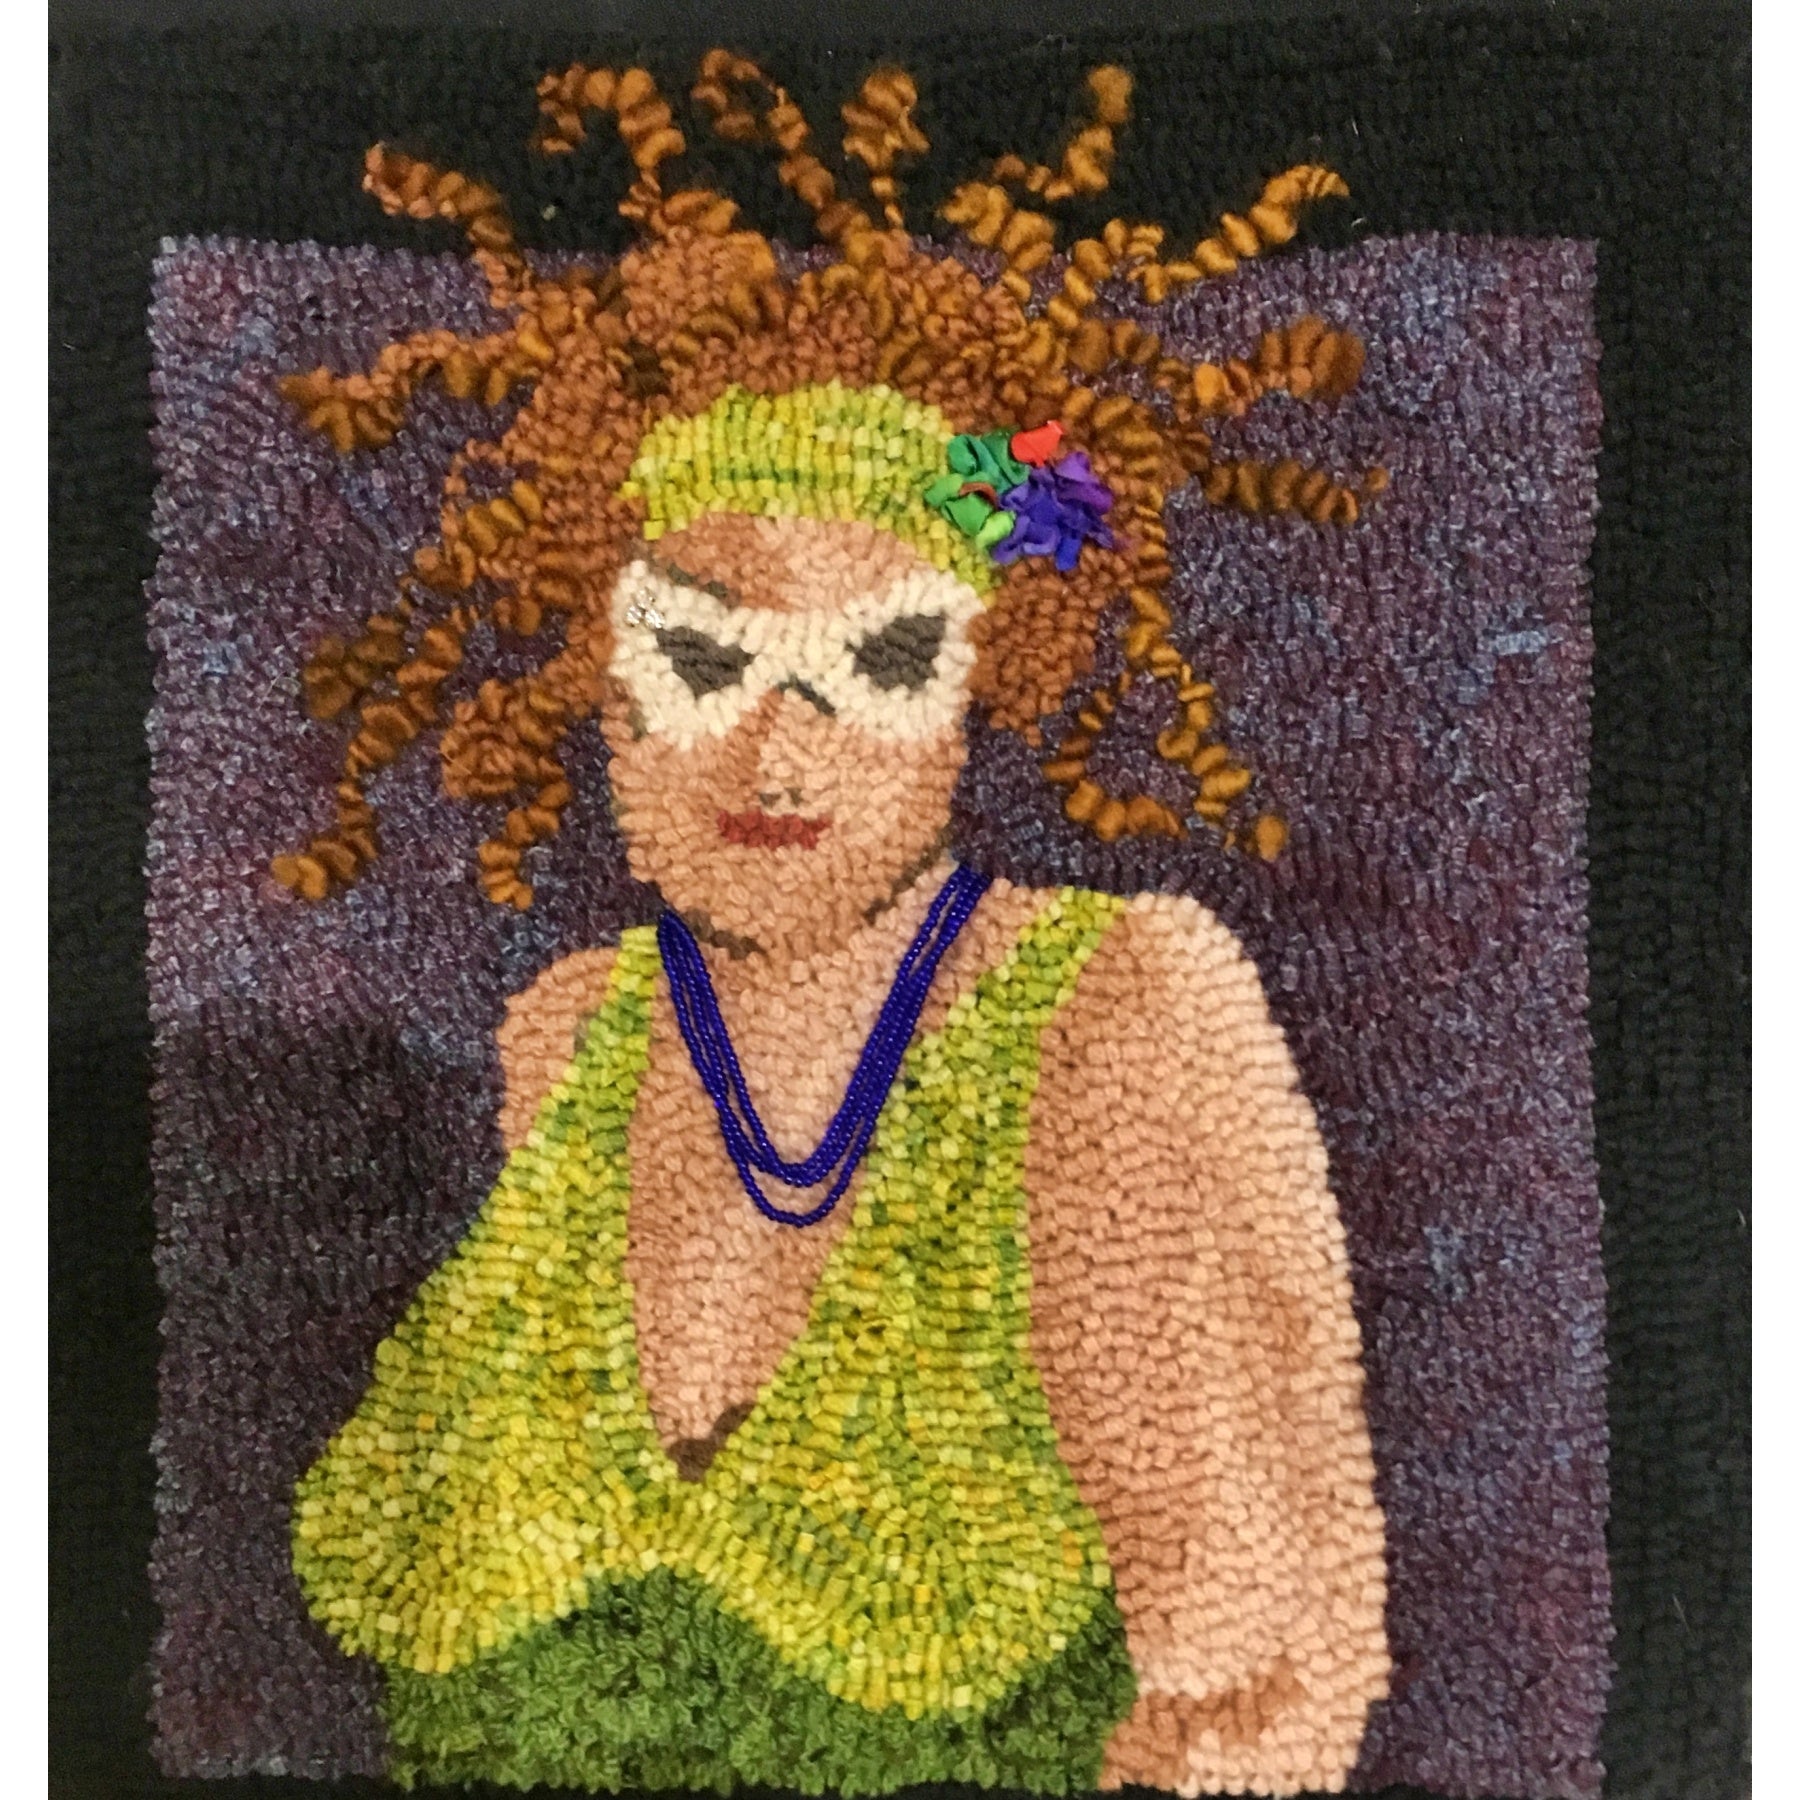 What's She Selling?, rug hooked by Beverly Mulcahy